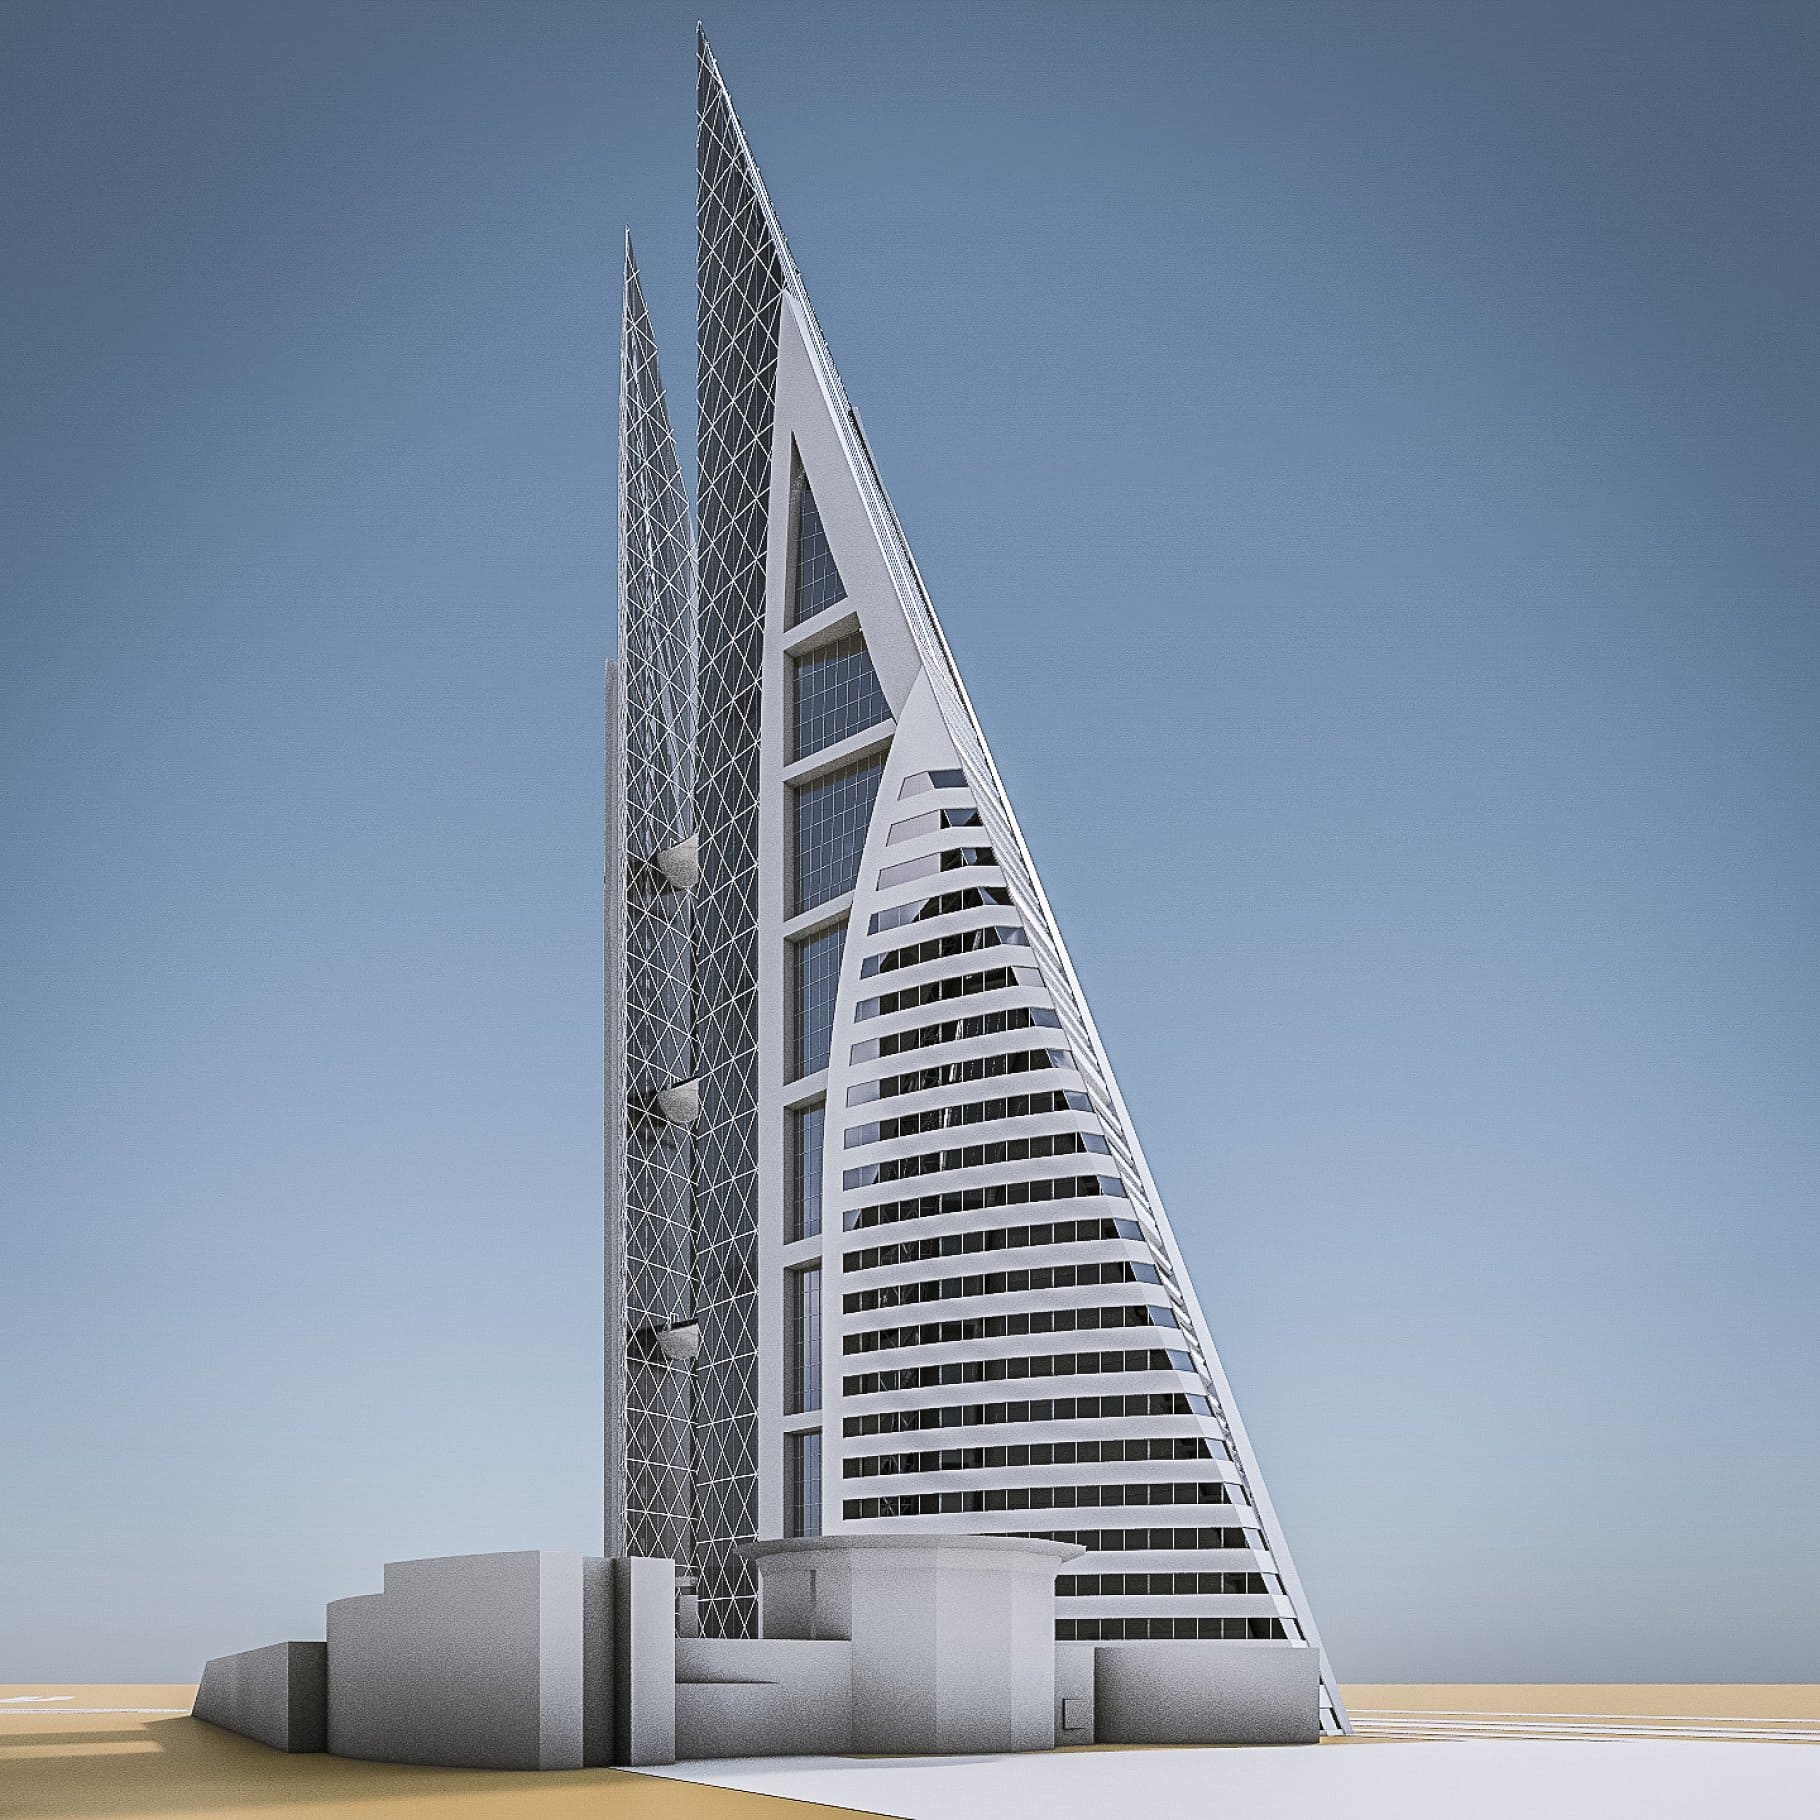 A real image of the Bahrain World Trade Center model against the background of the desert and the sky.